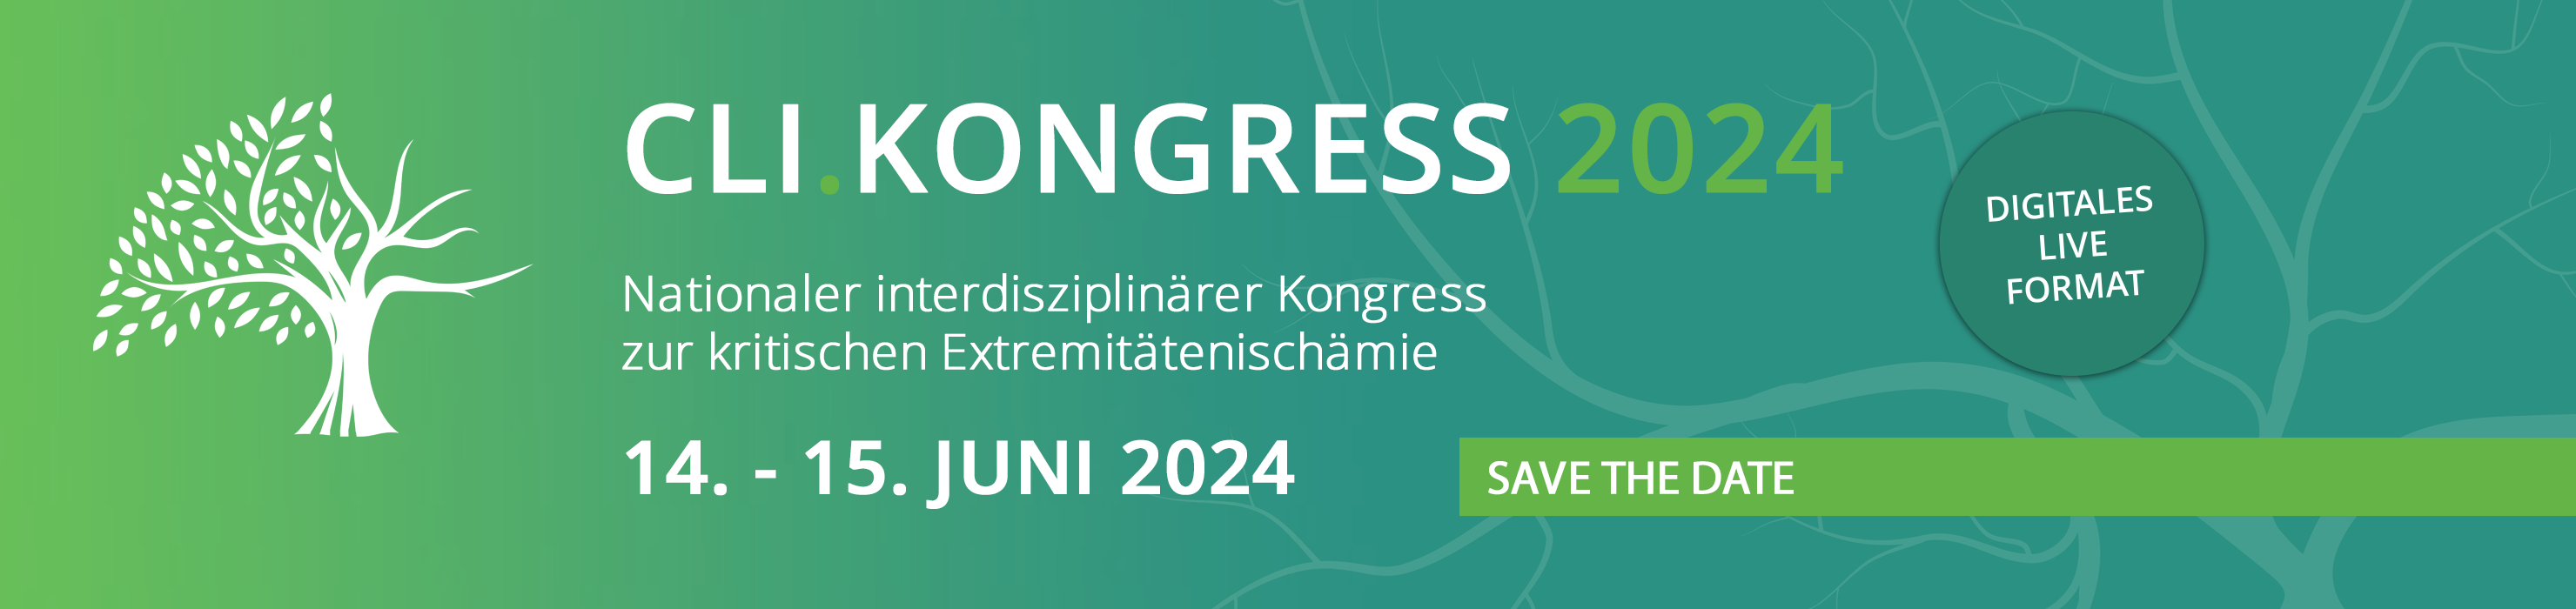 05-10-23_CLI_KONGRESS_2024_Online_Banner_Save_the_Date_2960x700px